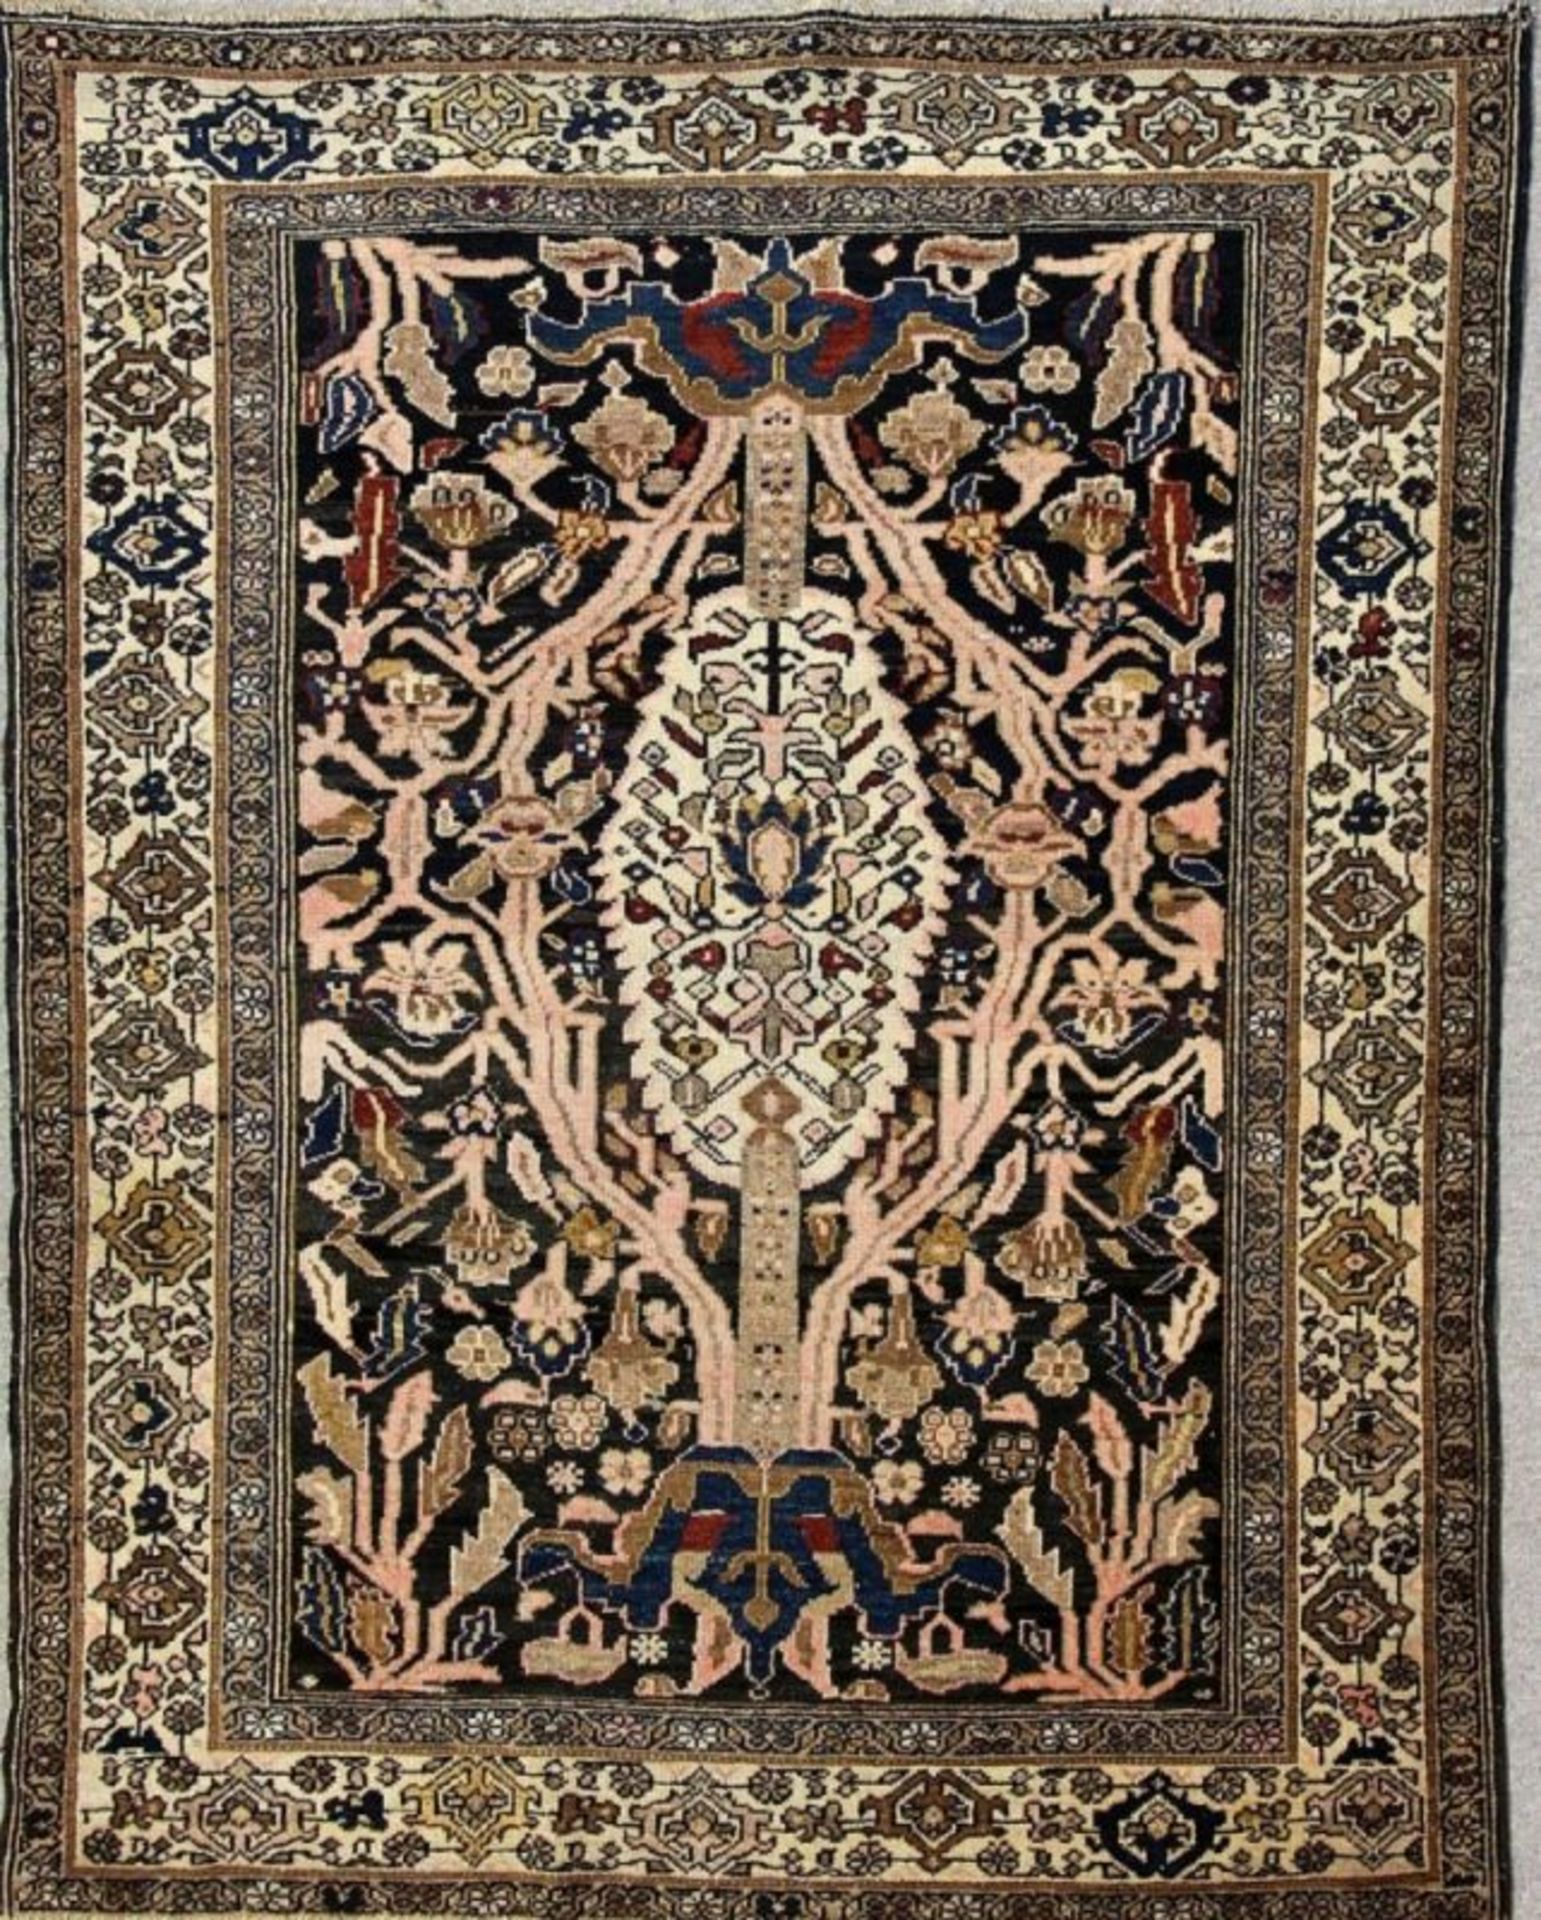 ALTER ISFAHAN. Persien. 147x125cm. Mit Zertifikat AN OLD ISFAHAN RUG Persia. 147 x 125 cm. With